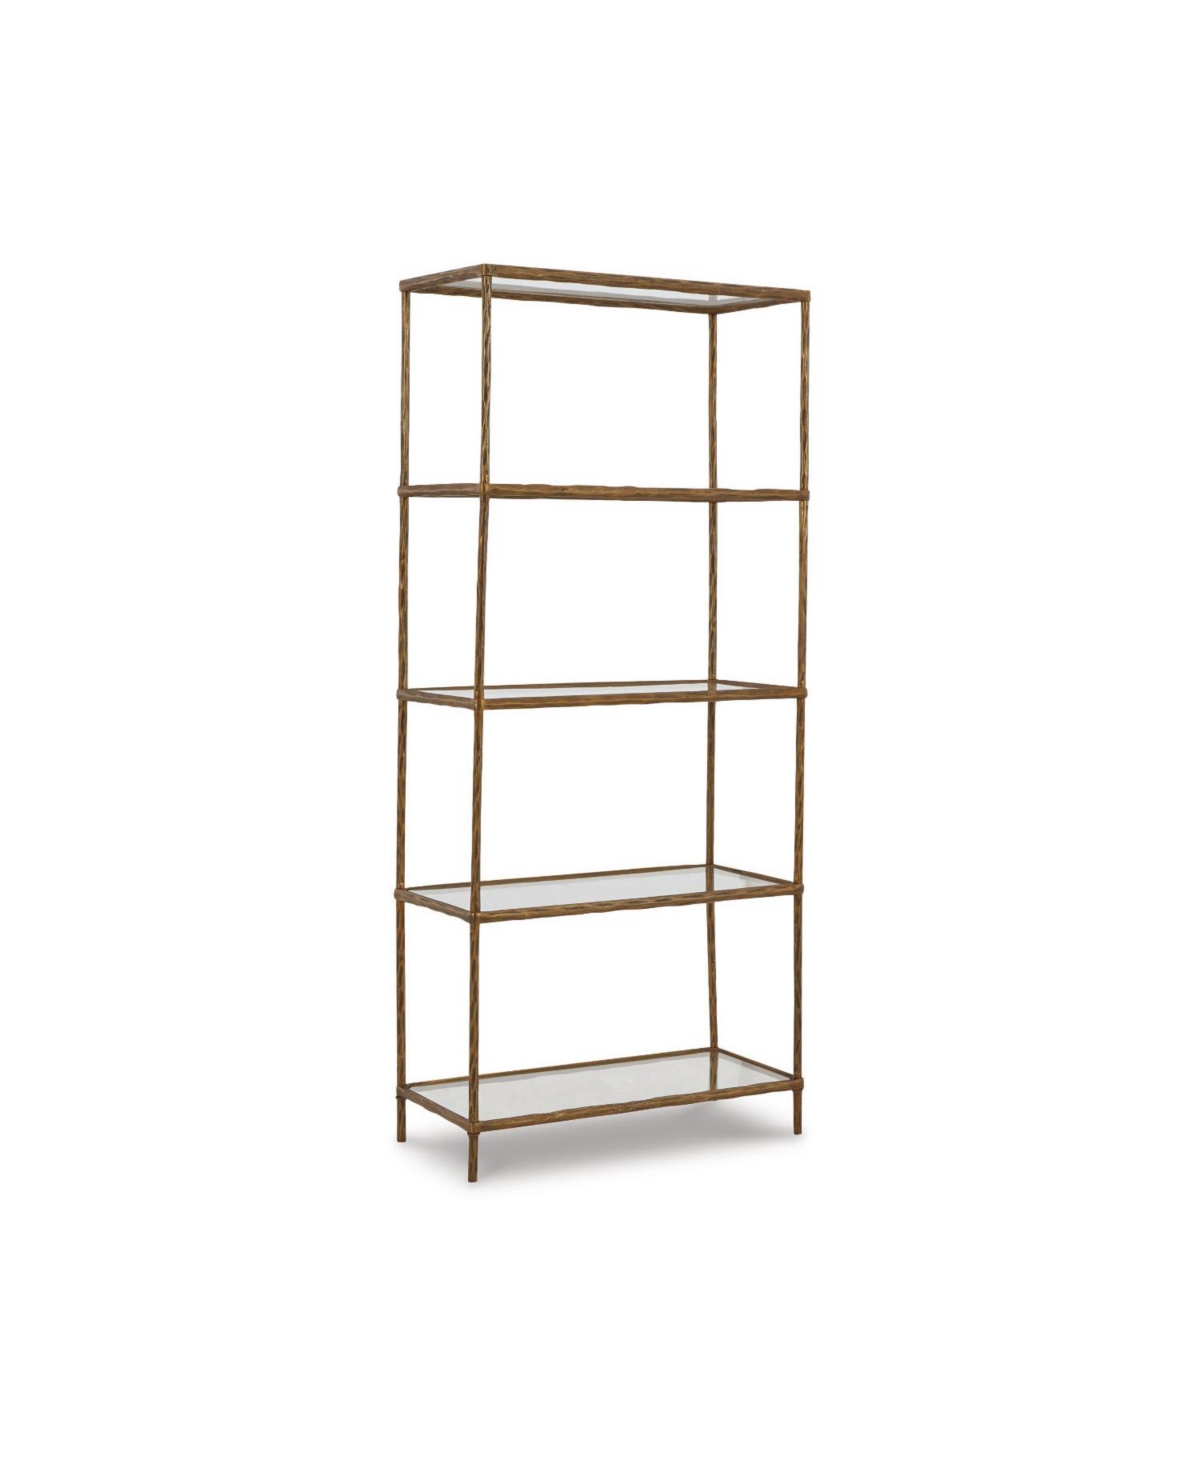 Signature Design By Ashley Ryandale Bookcase In Antique Brass Finish